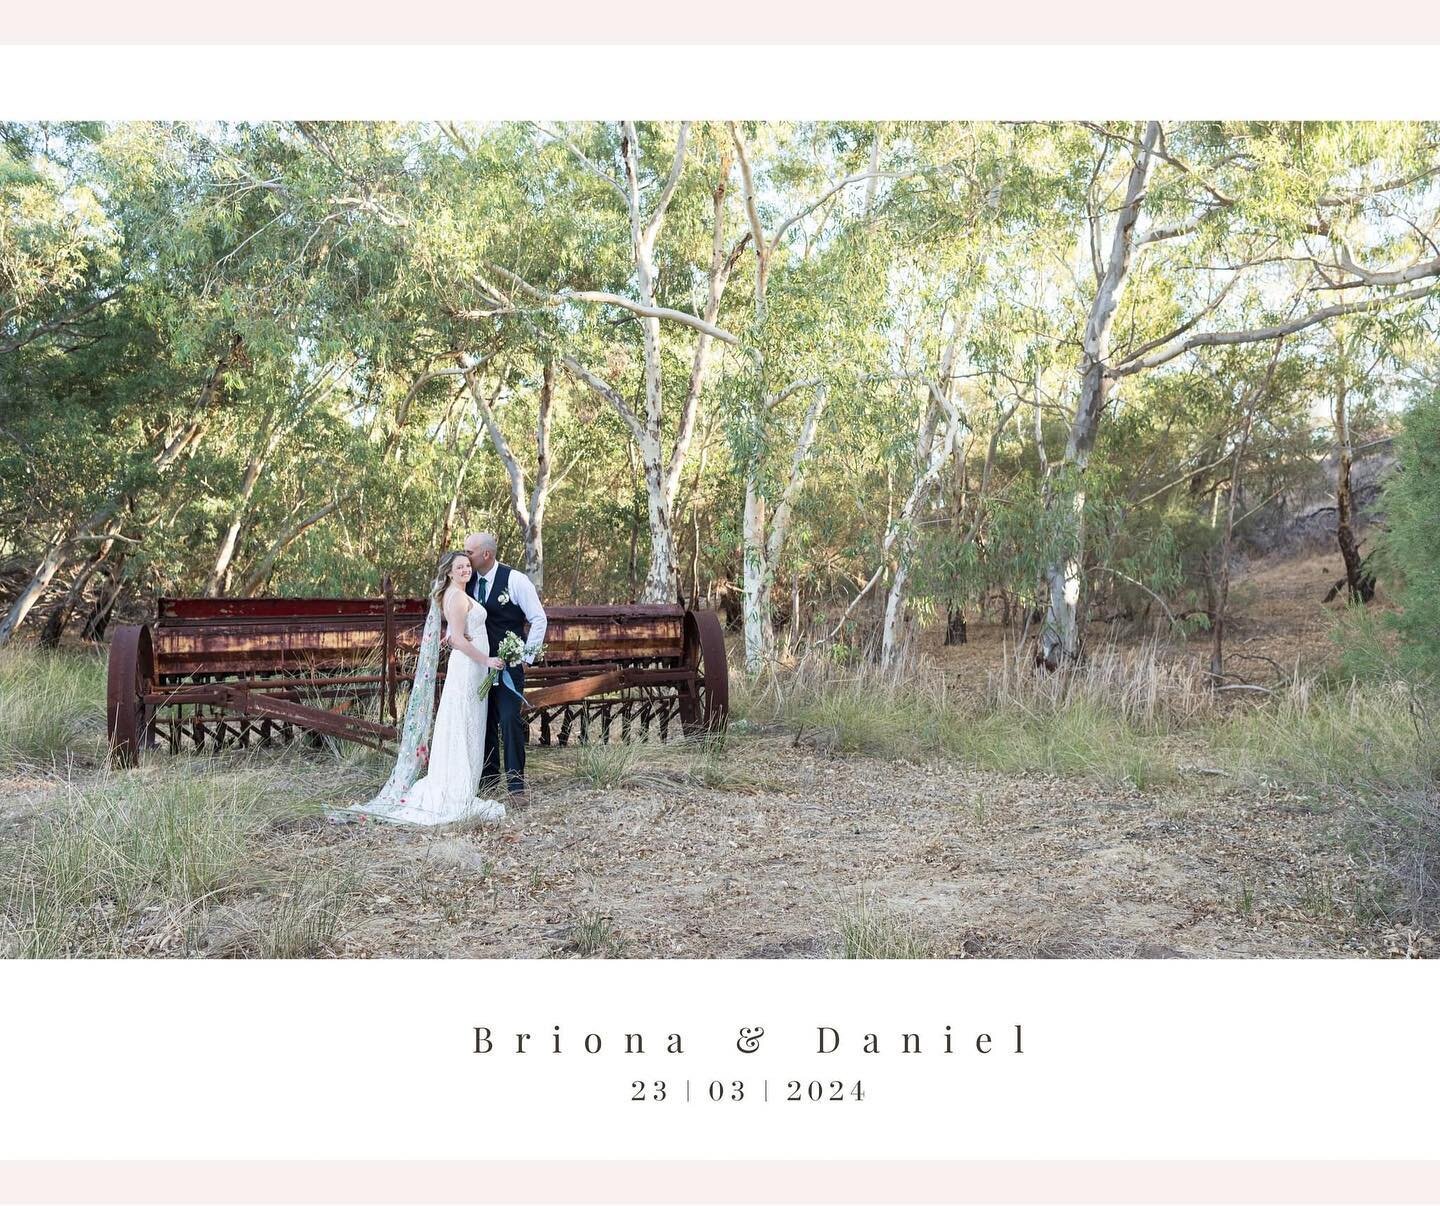 Briona + Daniel ❤️🥂❤️

Last Saturday we were honoured to capture Bri &amp; Dan&rsquo;s special day,  as they celebrated with family and friends at Nukara Farm.

It was a warm one especially for Bri&rsquo;s family who had just flown in from Ireland. 